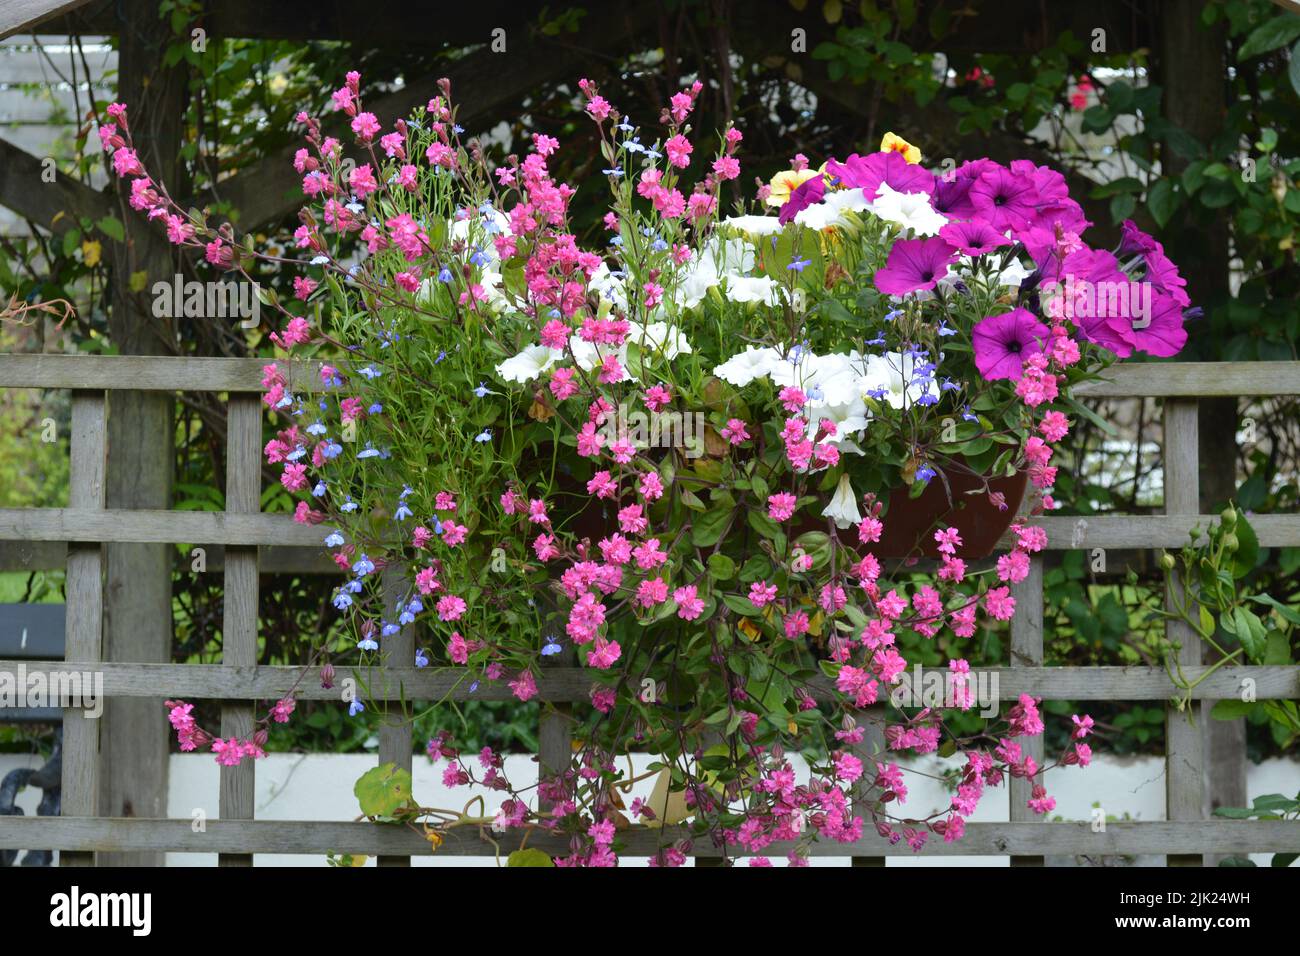 Summer Flowers in Container. Stock Photo